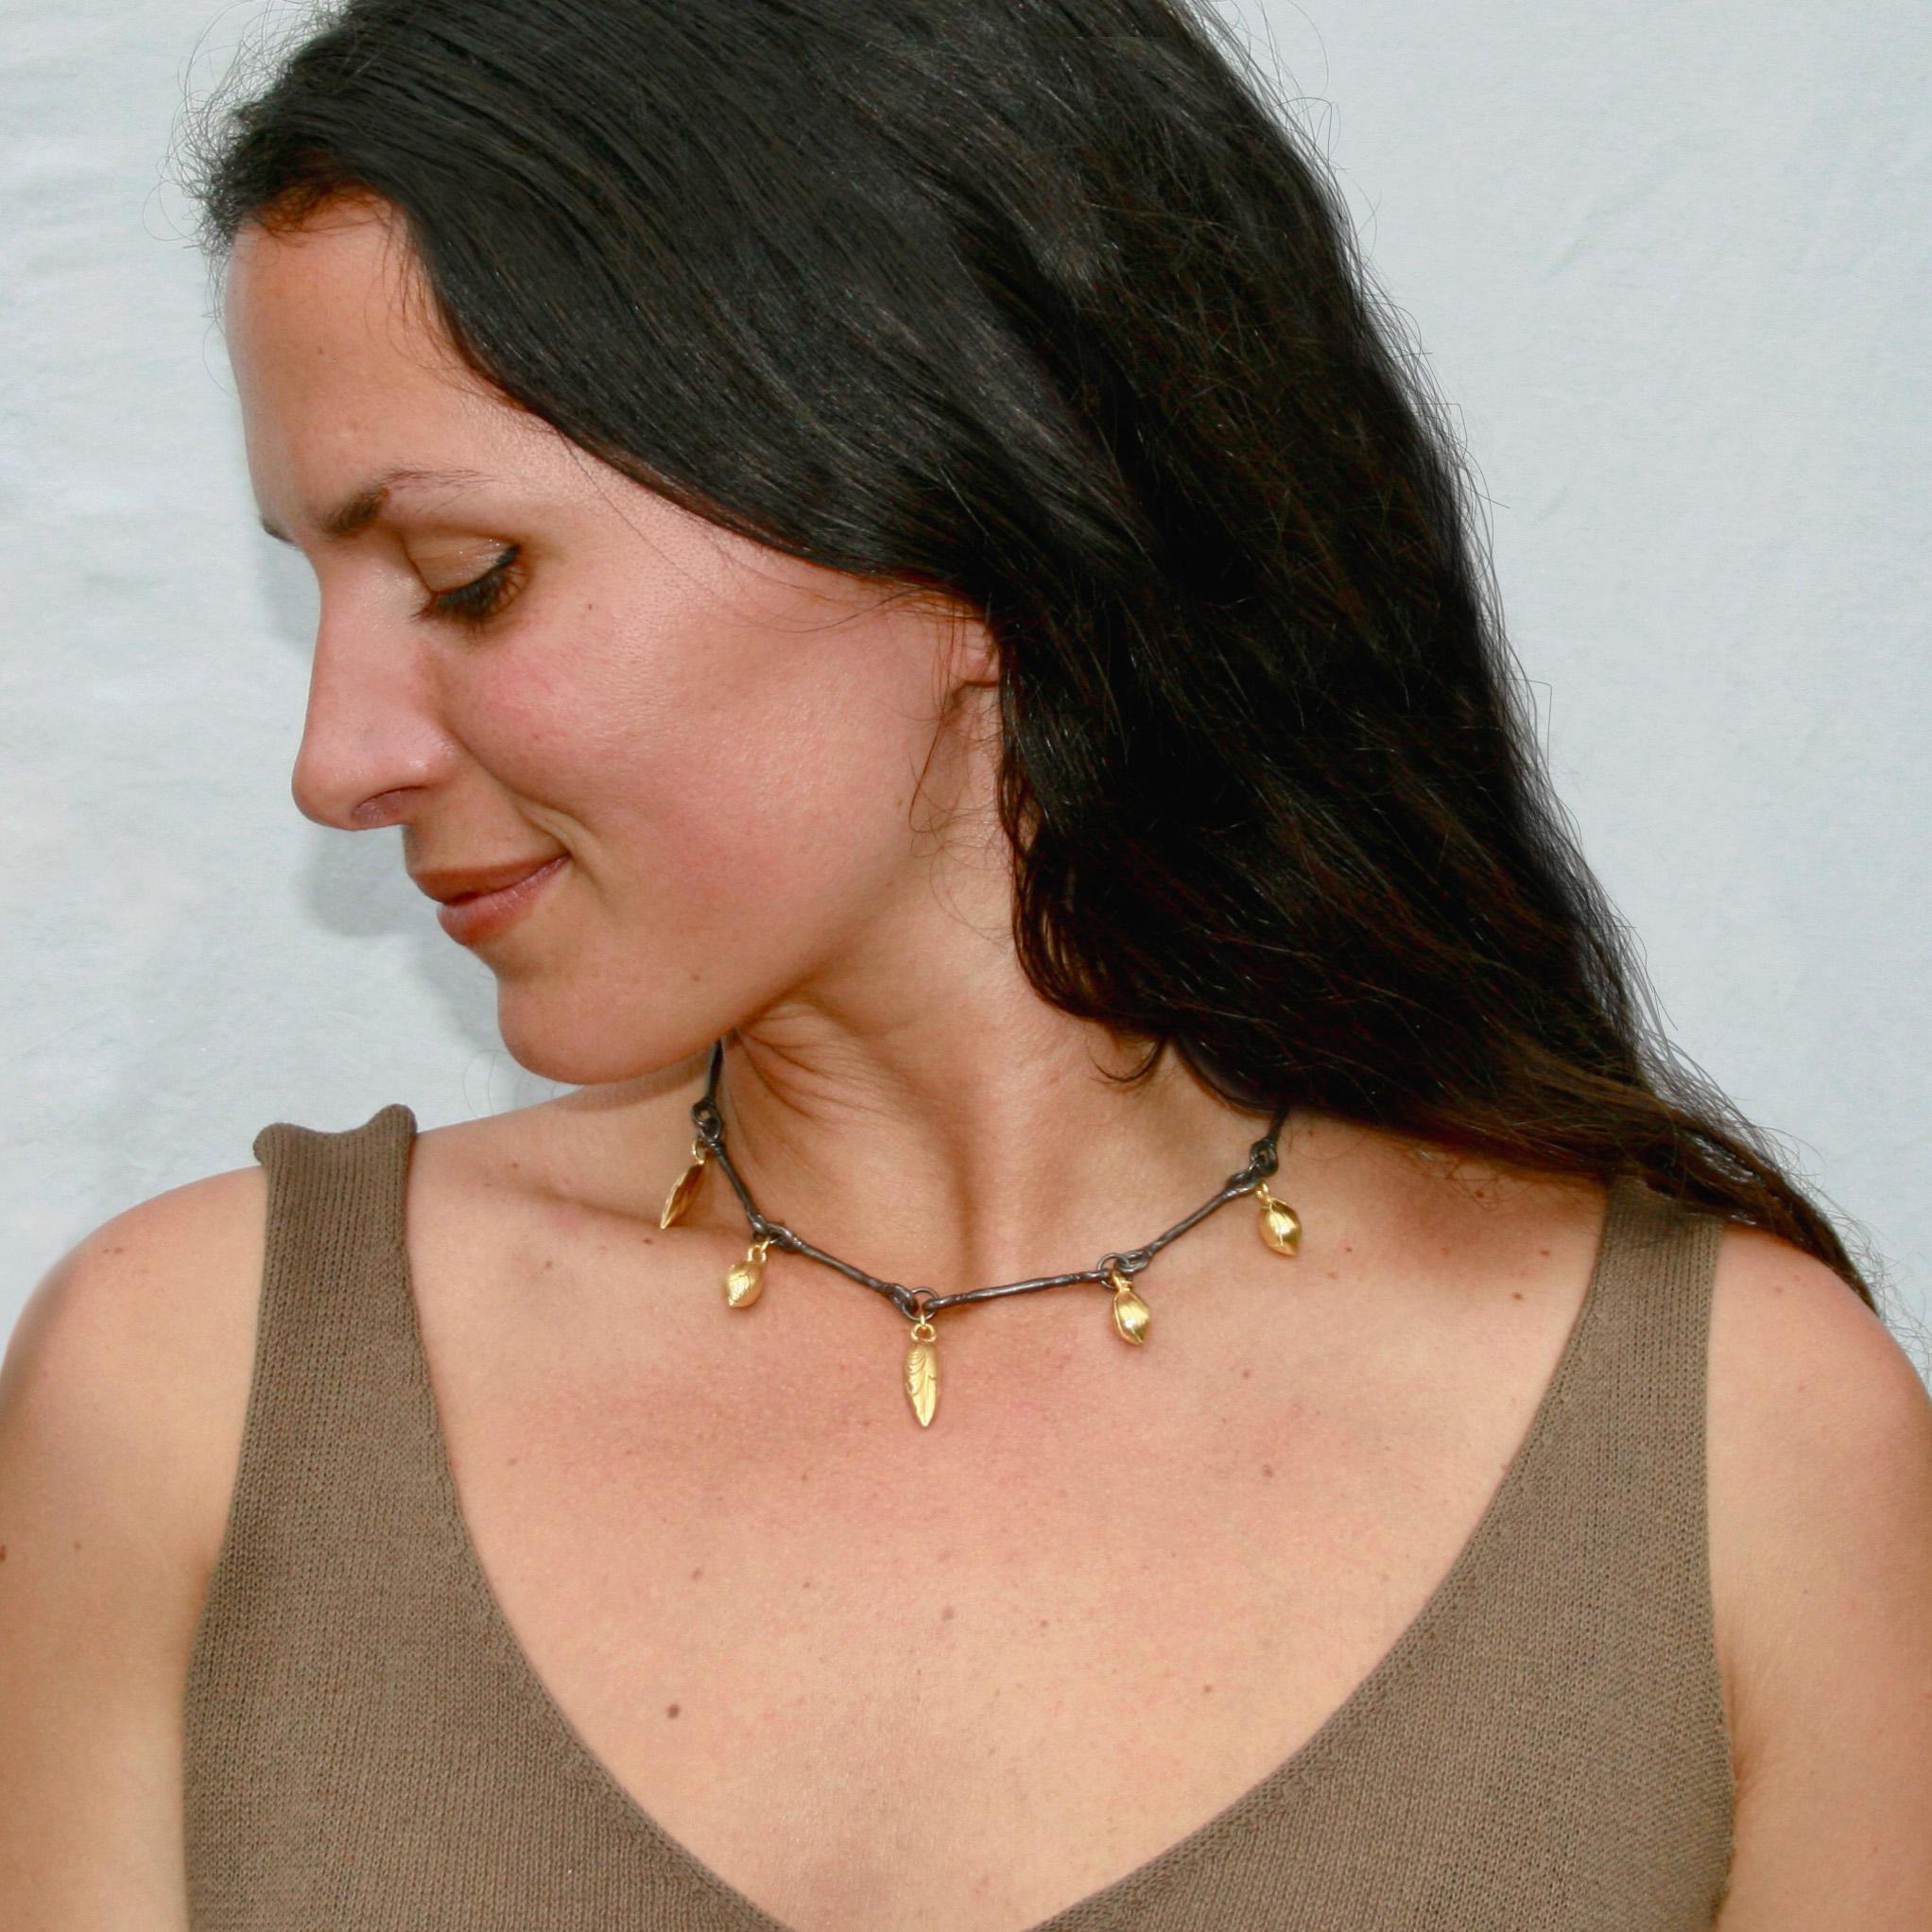 Date & Olive Seed Choker is crafted from gold-plated sterling silver olive and date seeds, both of which have significant cultural and symbolic importance in Turkish folklore. In Turkish culture, date pits are believed to have protective and healing